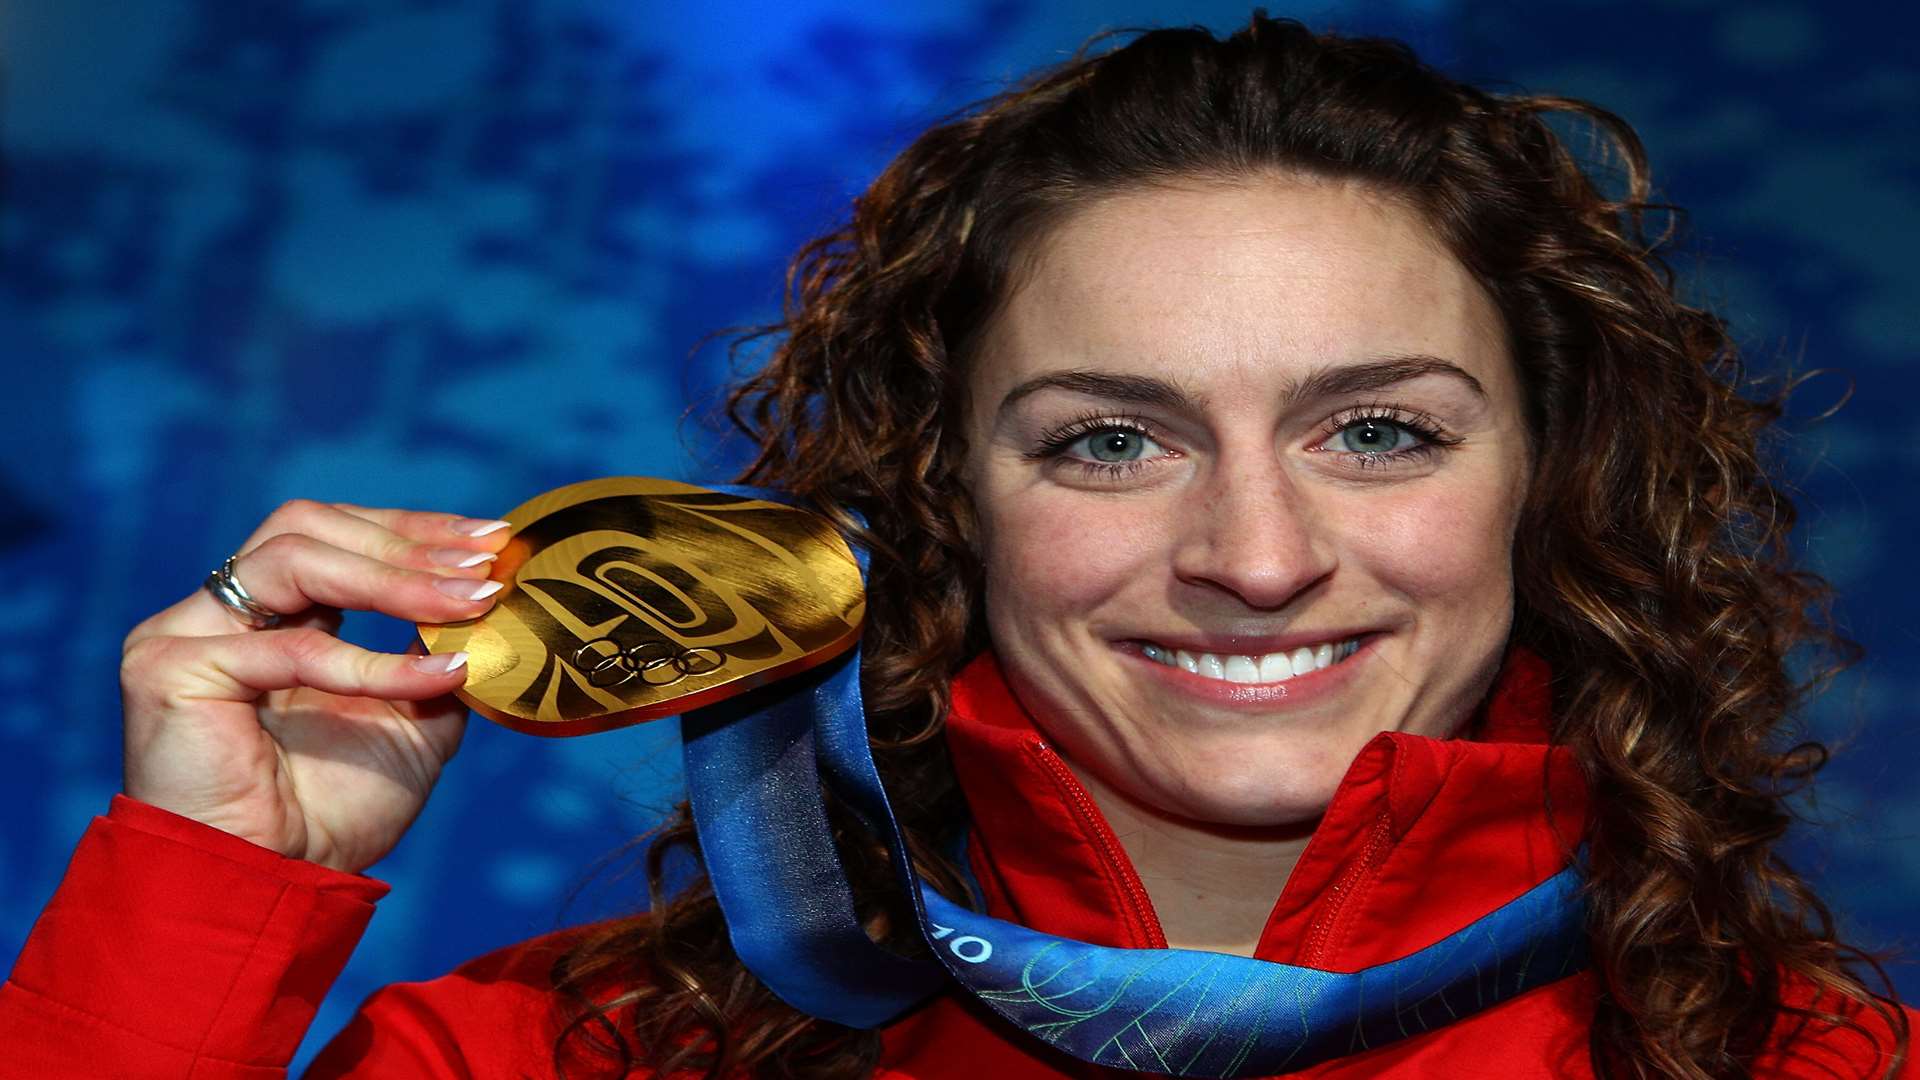 Amy Williams won gold in the skeleton bob in the 2010 Winter Olympics. Picture: Richard Heathcote Getty Images